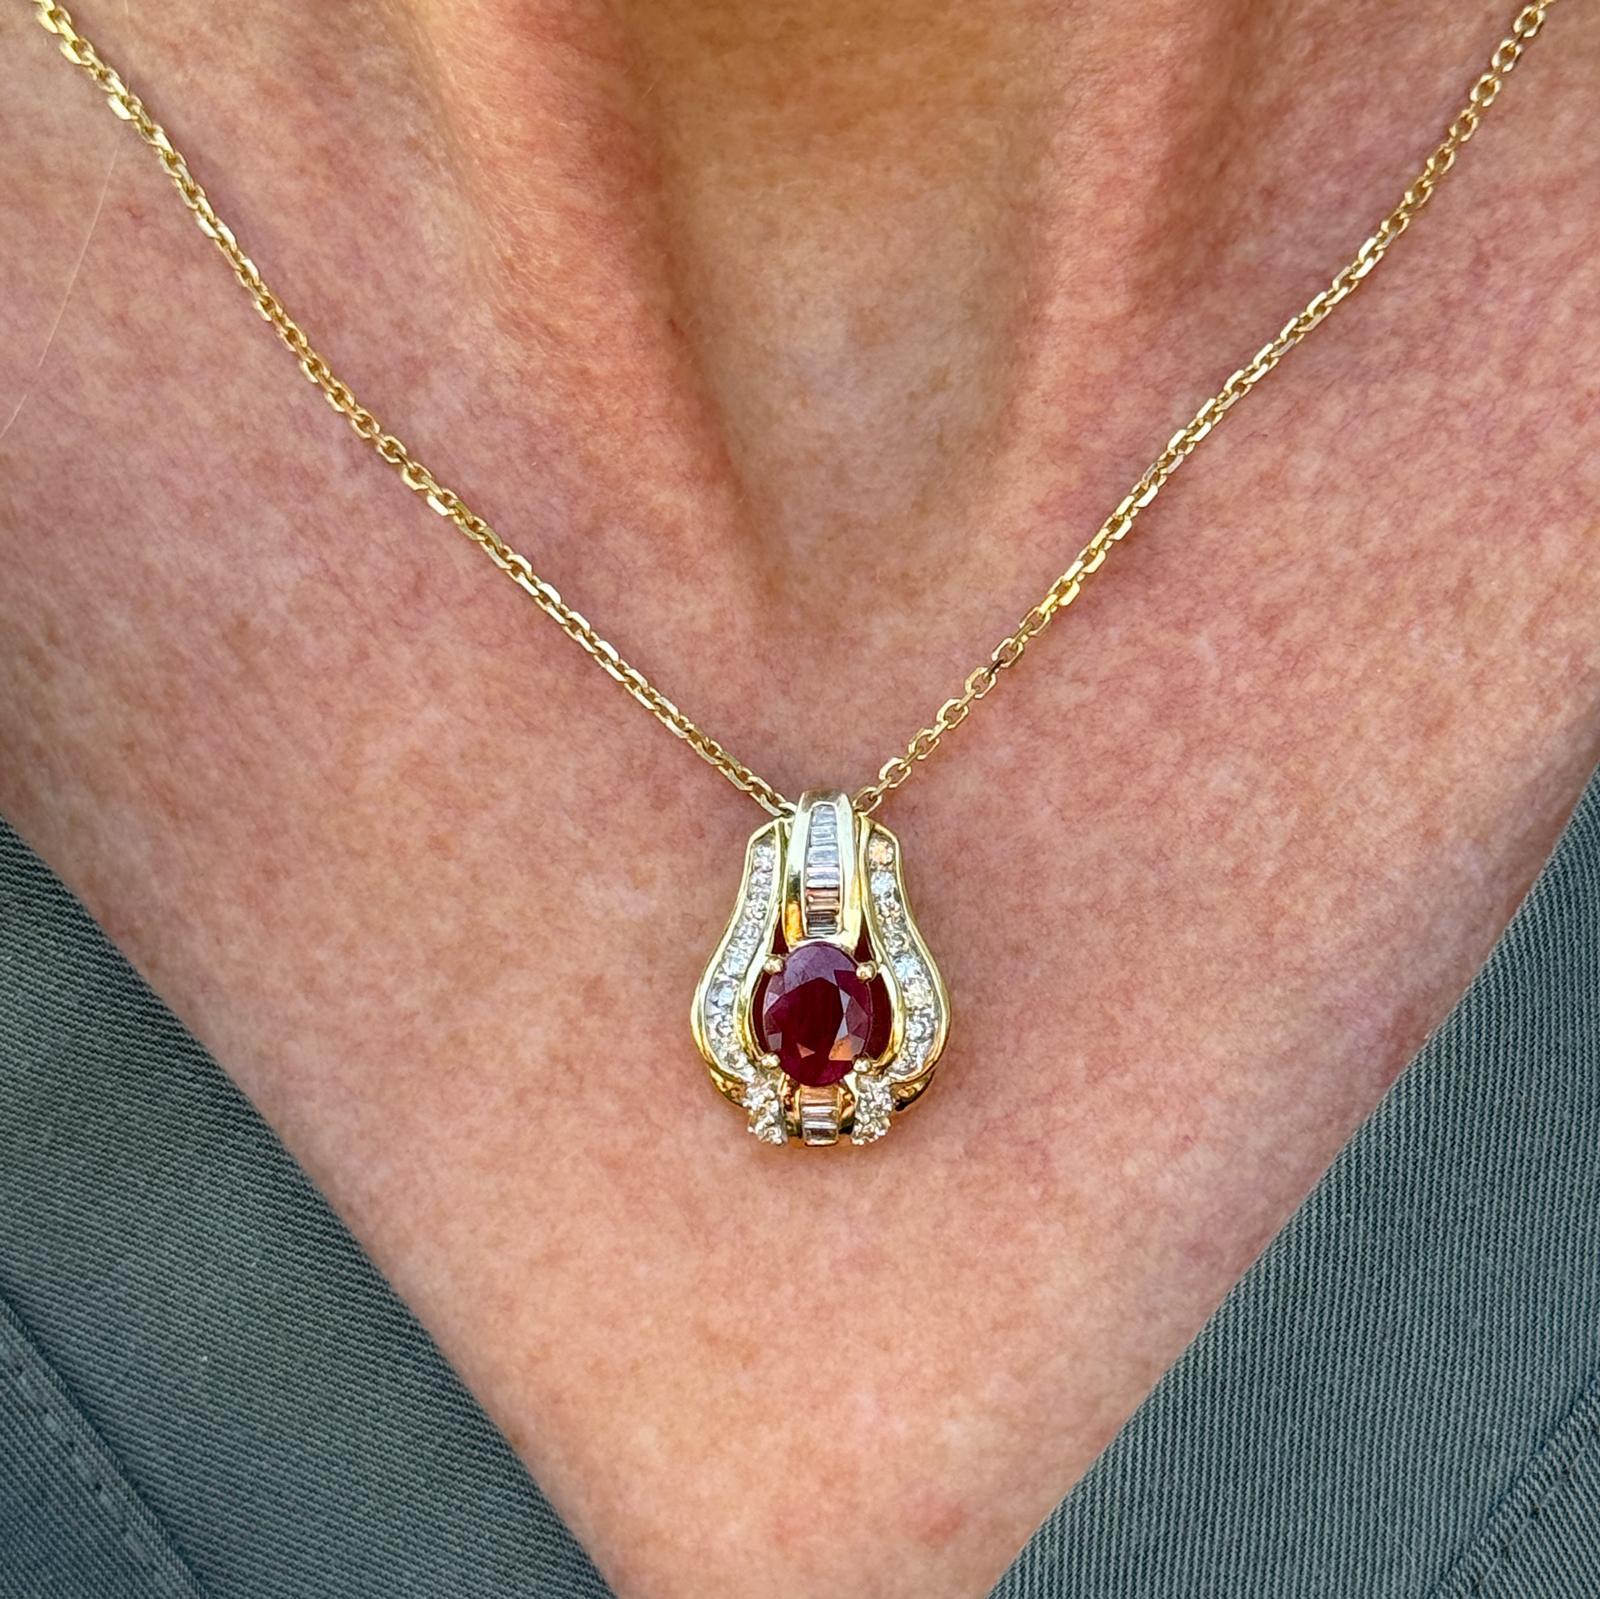 The pendant's focal point is a vibrant oval ruby gemstone (approximately 1.35 carat), known for its deep red hue symbolizing passion and vitality. Surrounding the ruby are 20 round brilliant and baguette cut sparkling diamonds, adding brilliance and